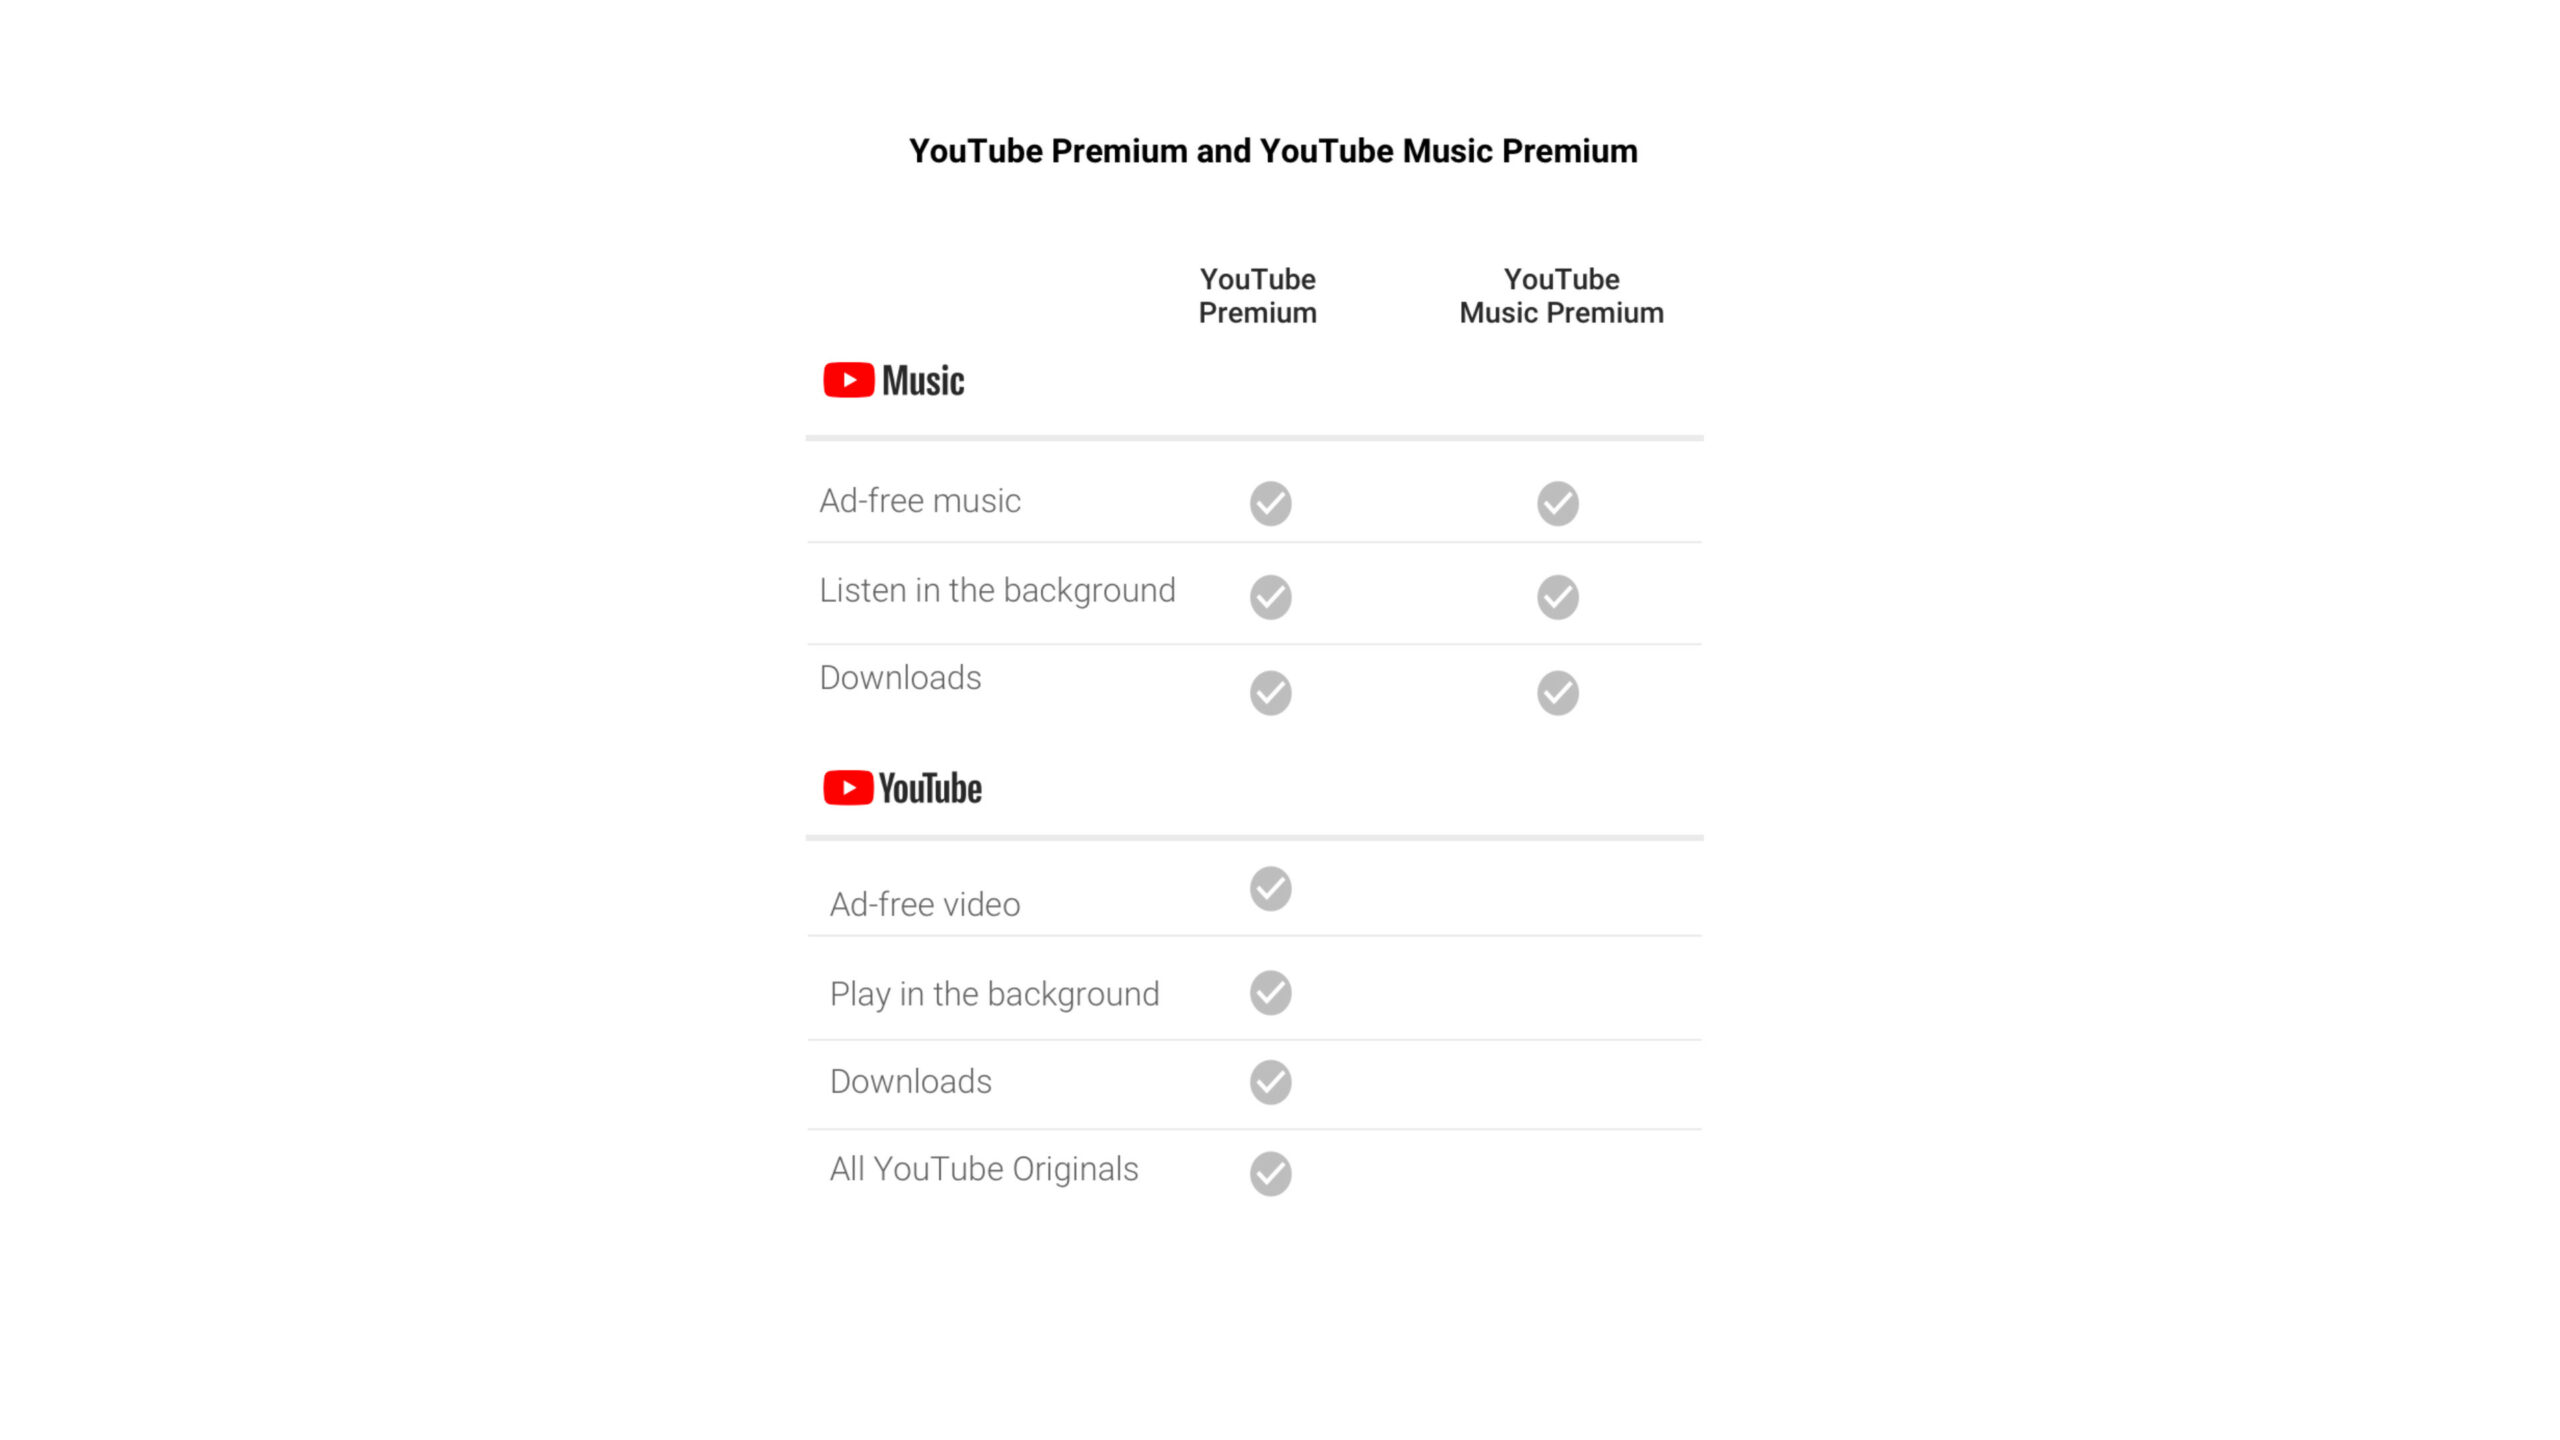 google launches prepaid plans in india for youtube premium scaled